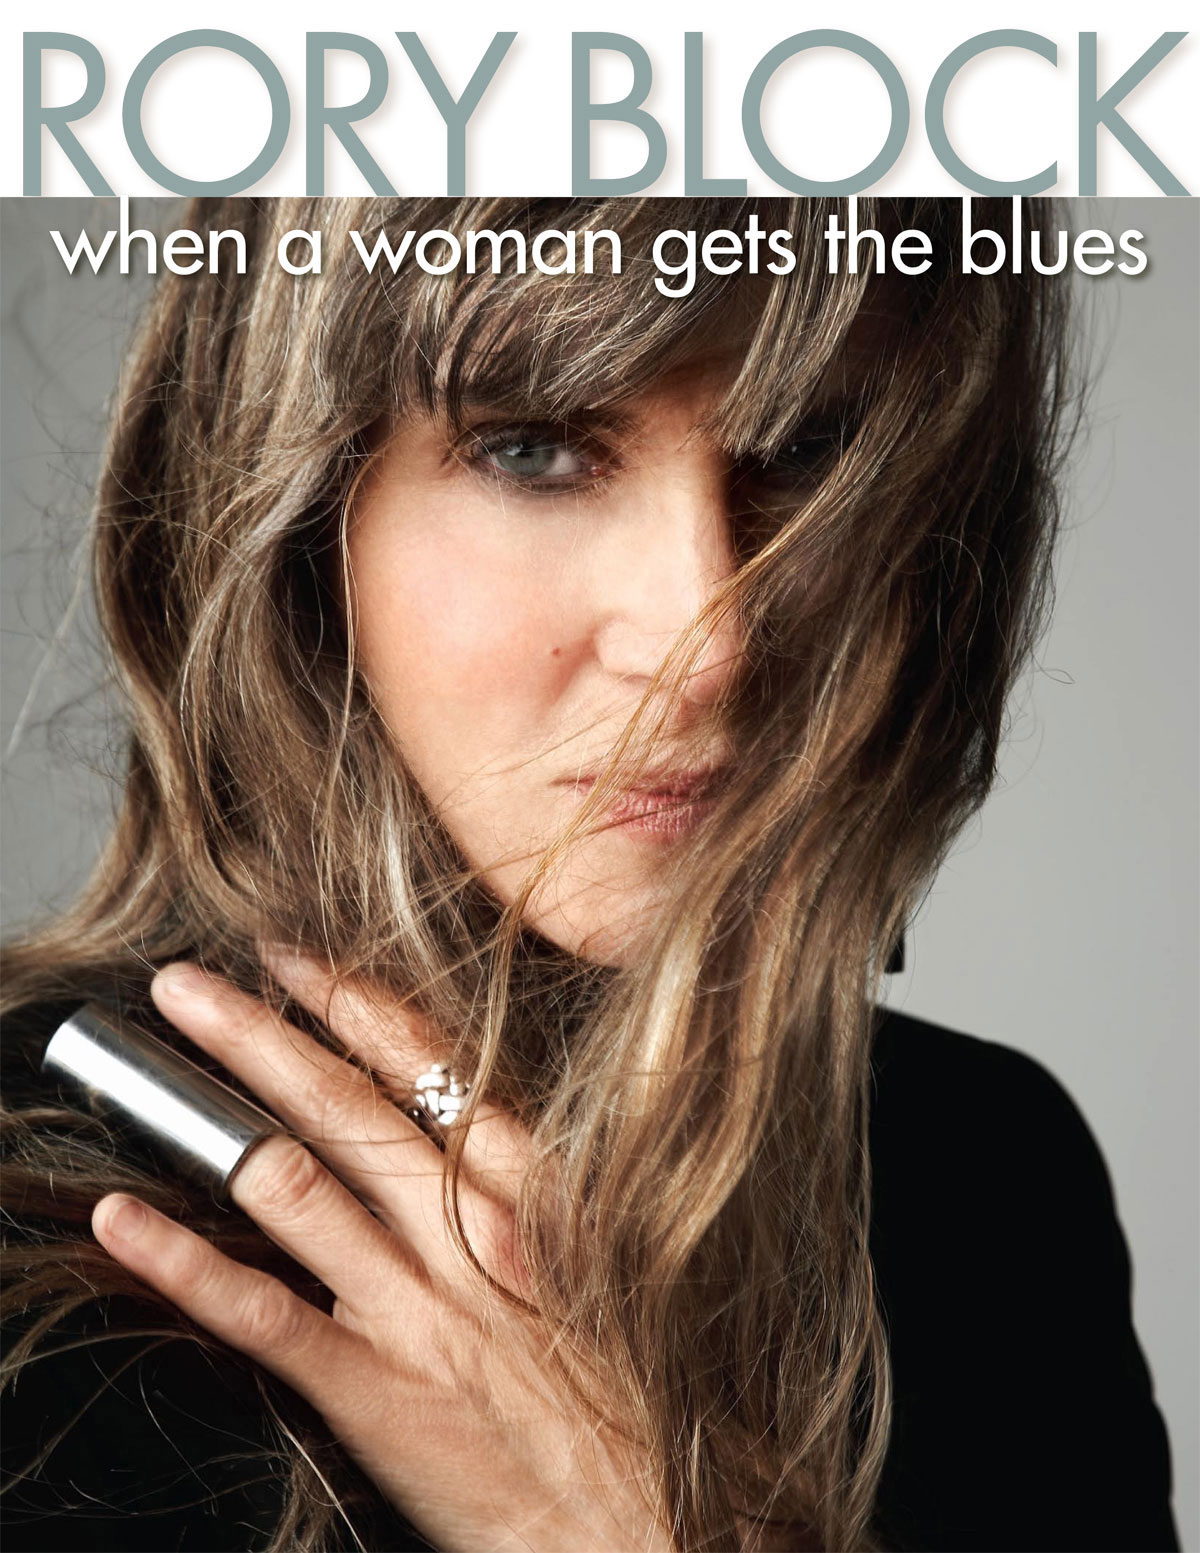 Rory Block - When A Woman Gets The Blues book cover image